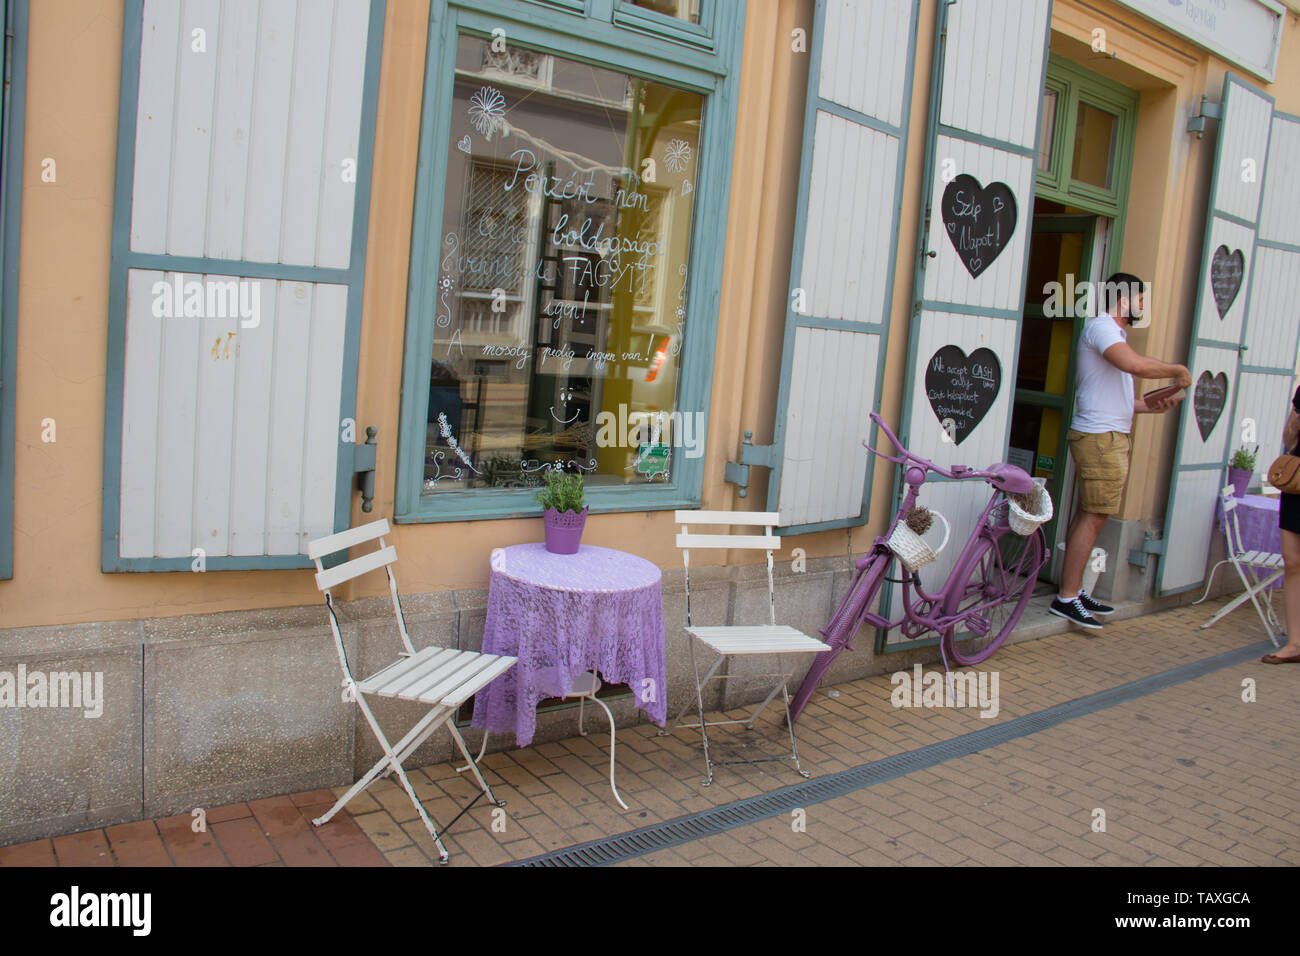 Small cute bar with table outside on sidewalk, with vintage bicycle as an decoration Stock Photo